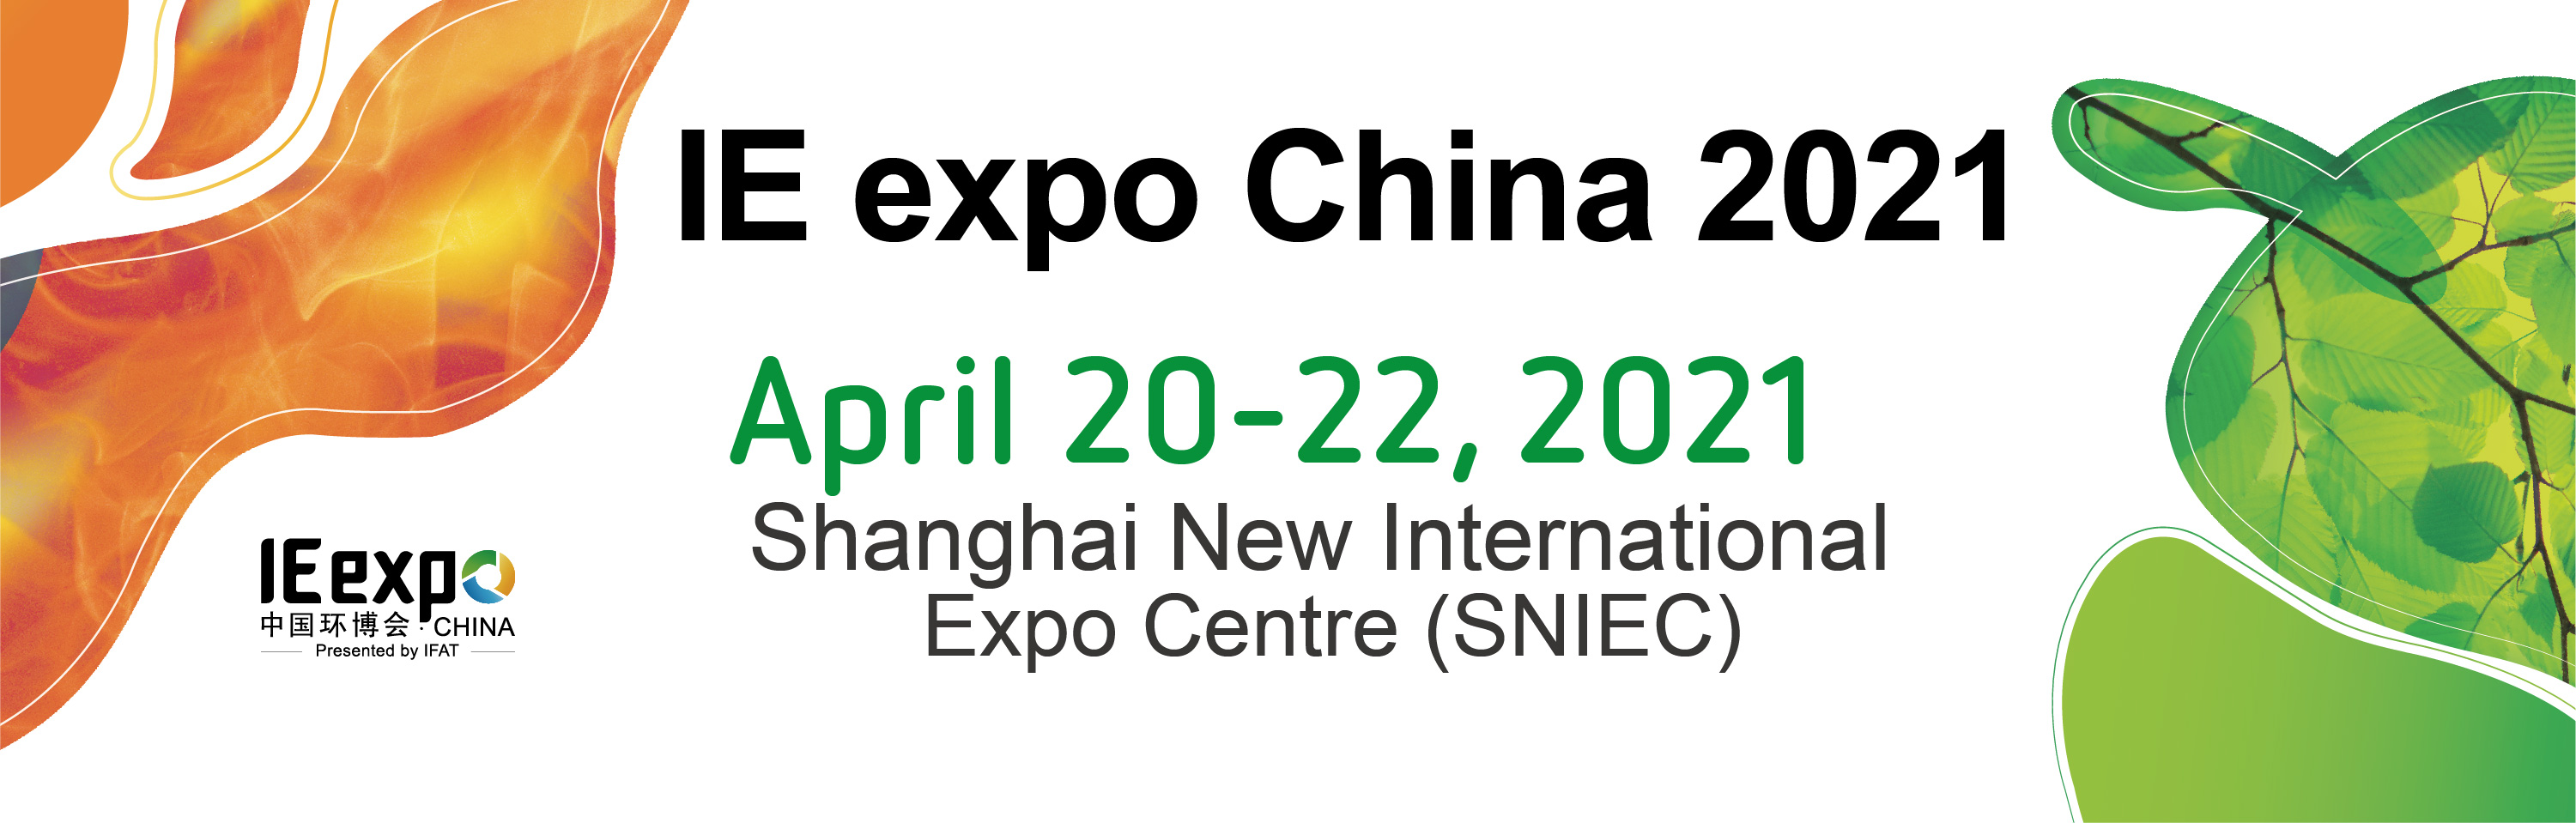 IE expo China 2021: Asia’s Leading Trade Fair for Environmental Technology Solutions: Water, Waste, Air and Soil